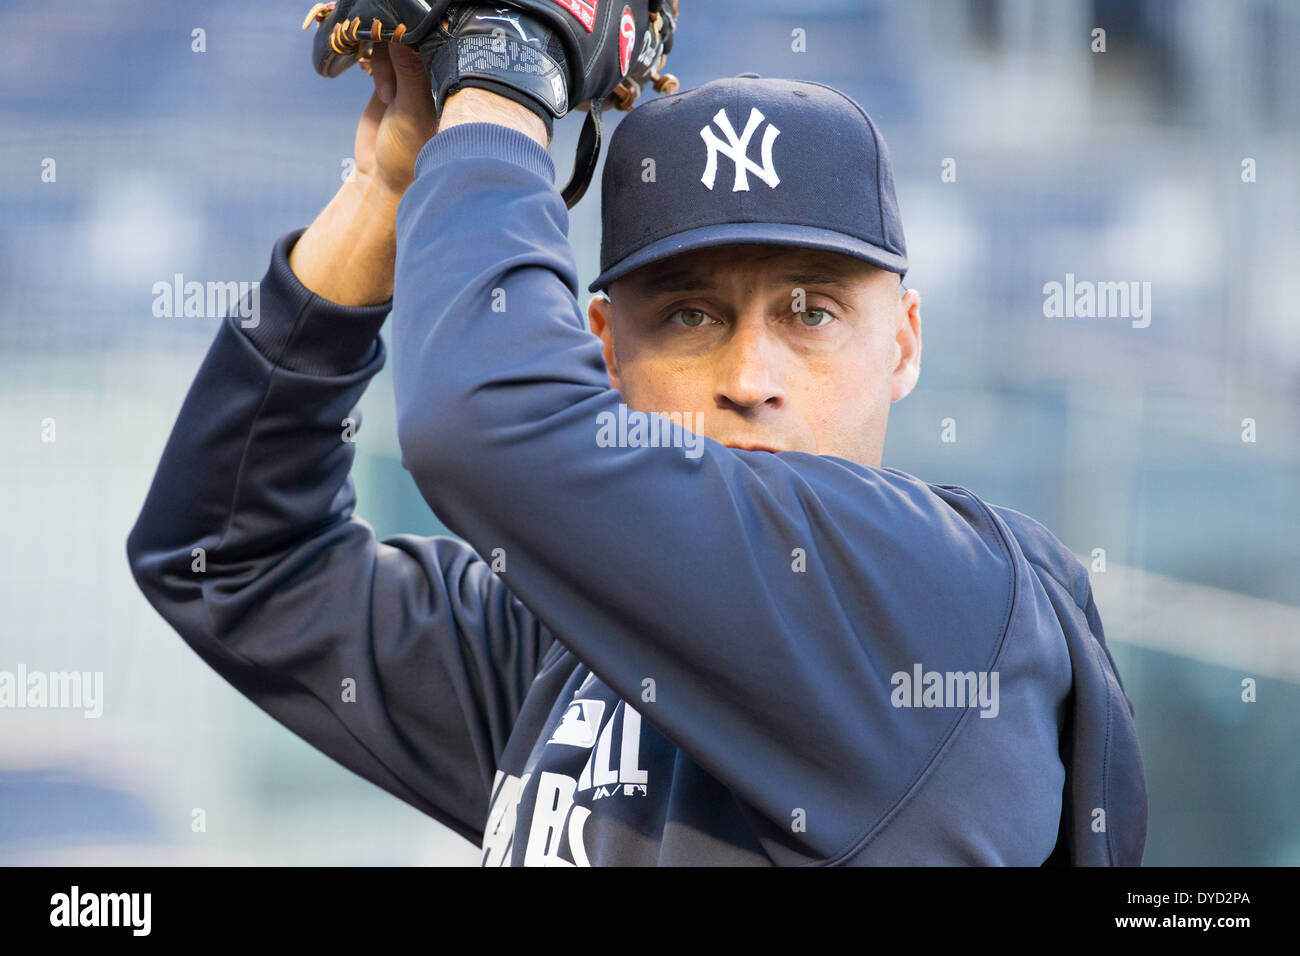 Bronx, New York, USA. 10th Apr, 2014. Derek Jeter (Yankees) MLB : Derek Jeter of the New York Yankees during practice before the baseball game against the Baltimore Orioles at Yankee Stadium in Bronx, New York, United States . © Thomas Anderson/AFLO/Alamy Live News Stock Photo